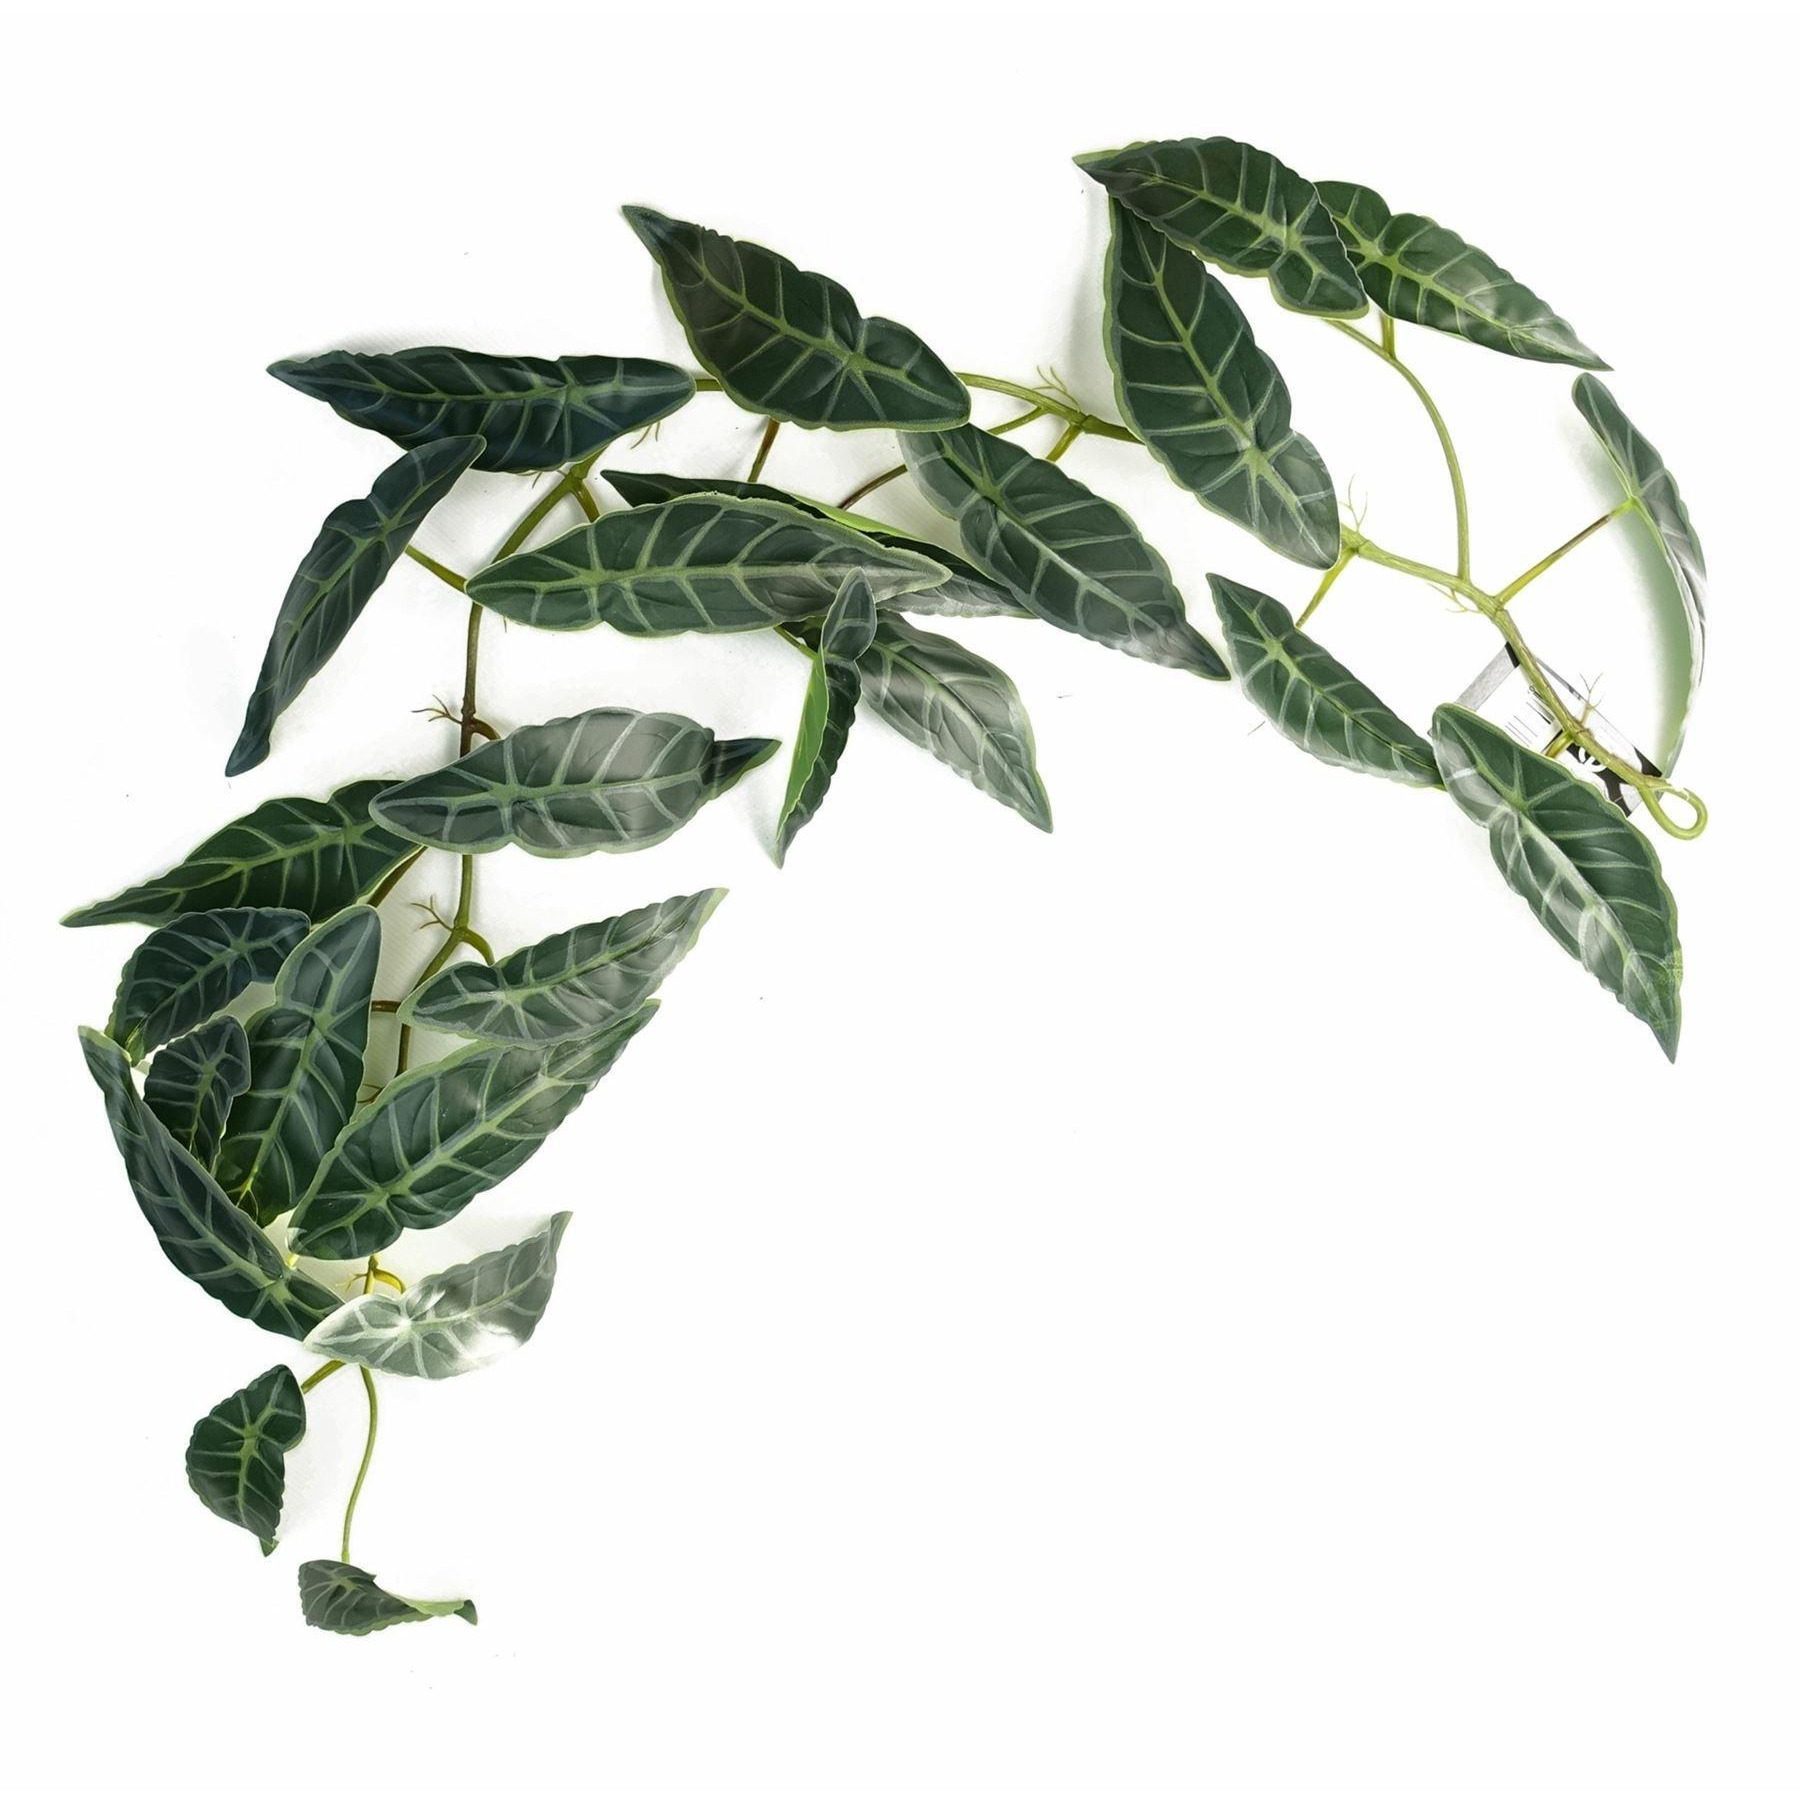 110cm Artificial Trailing Hanging Dark Natural Look Leaf Plant Realistic - image 1